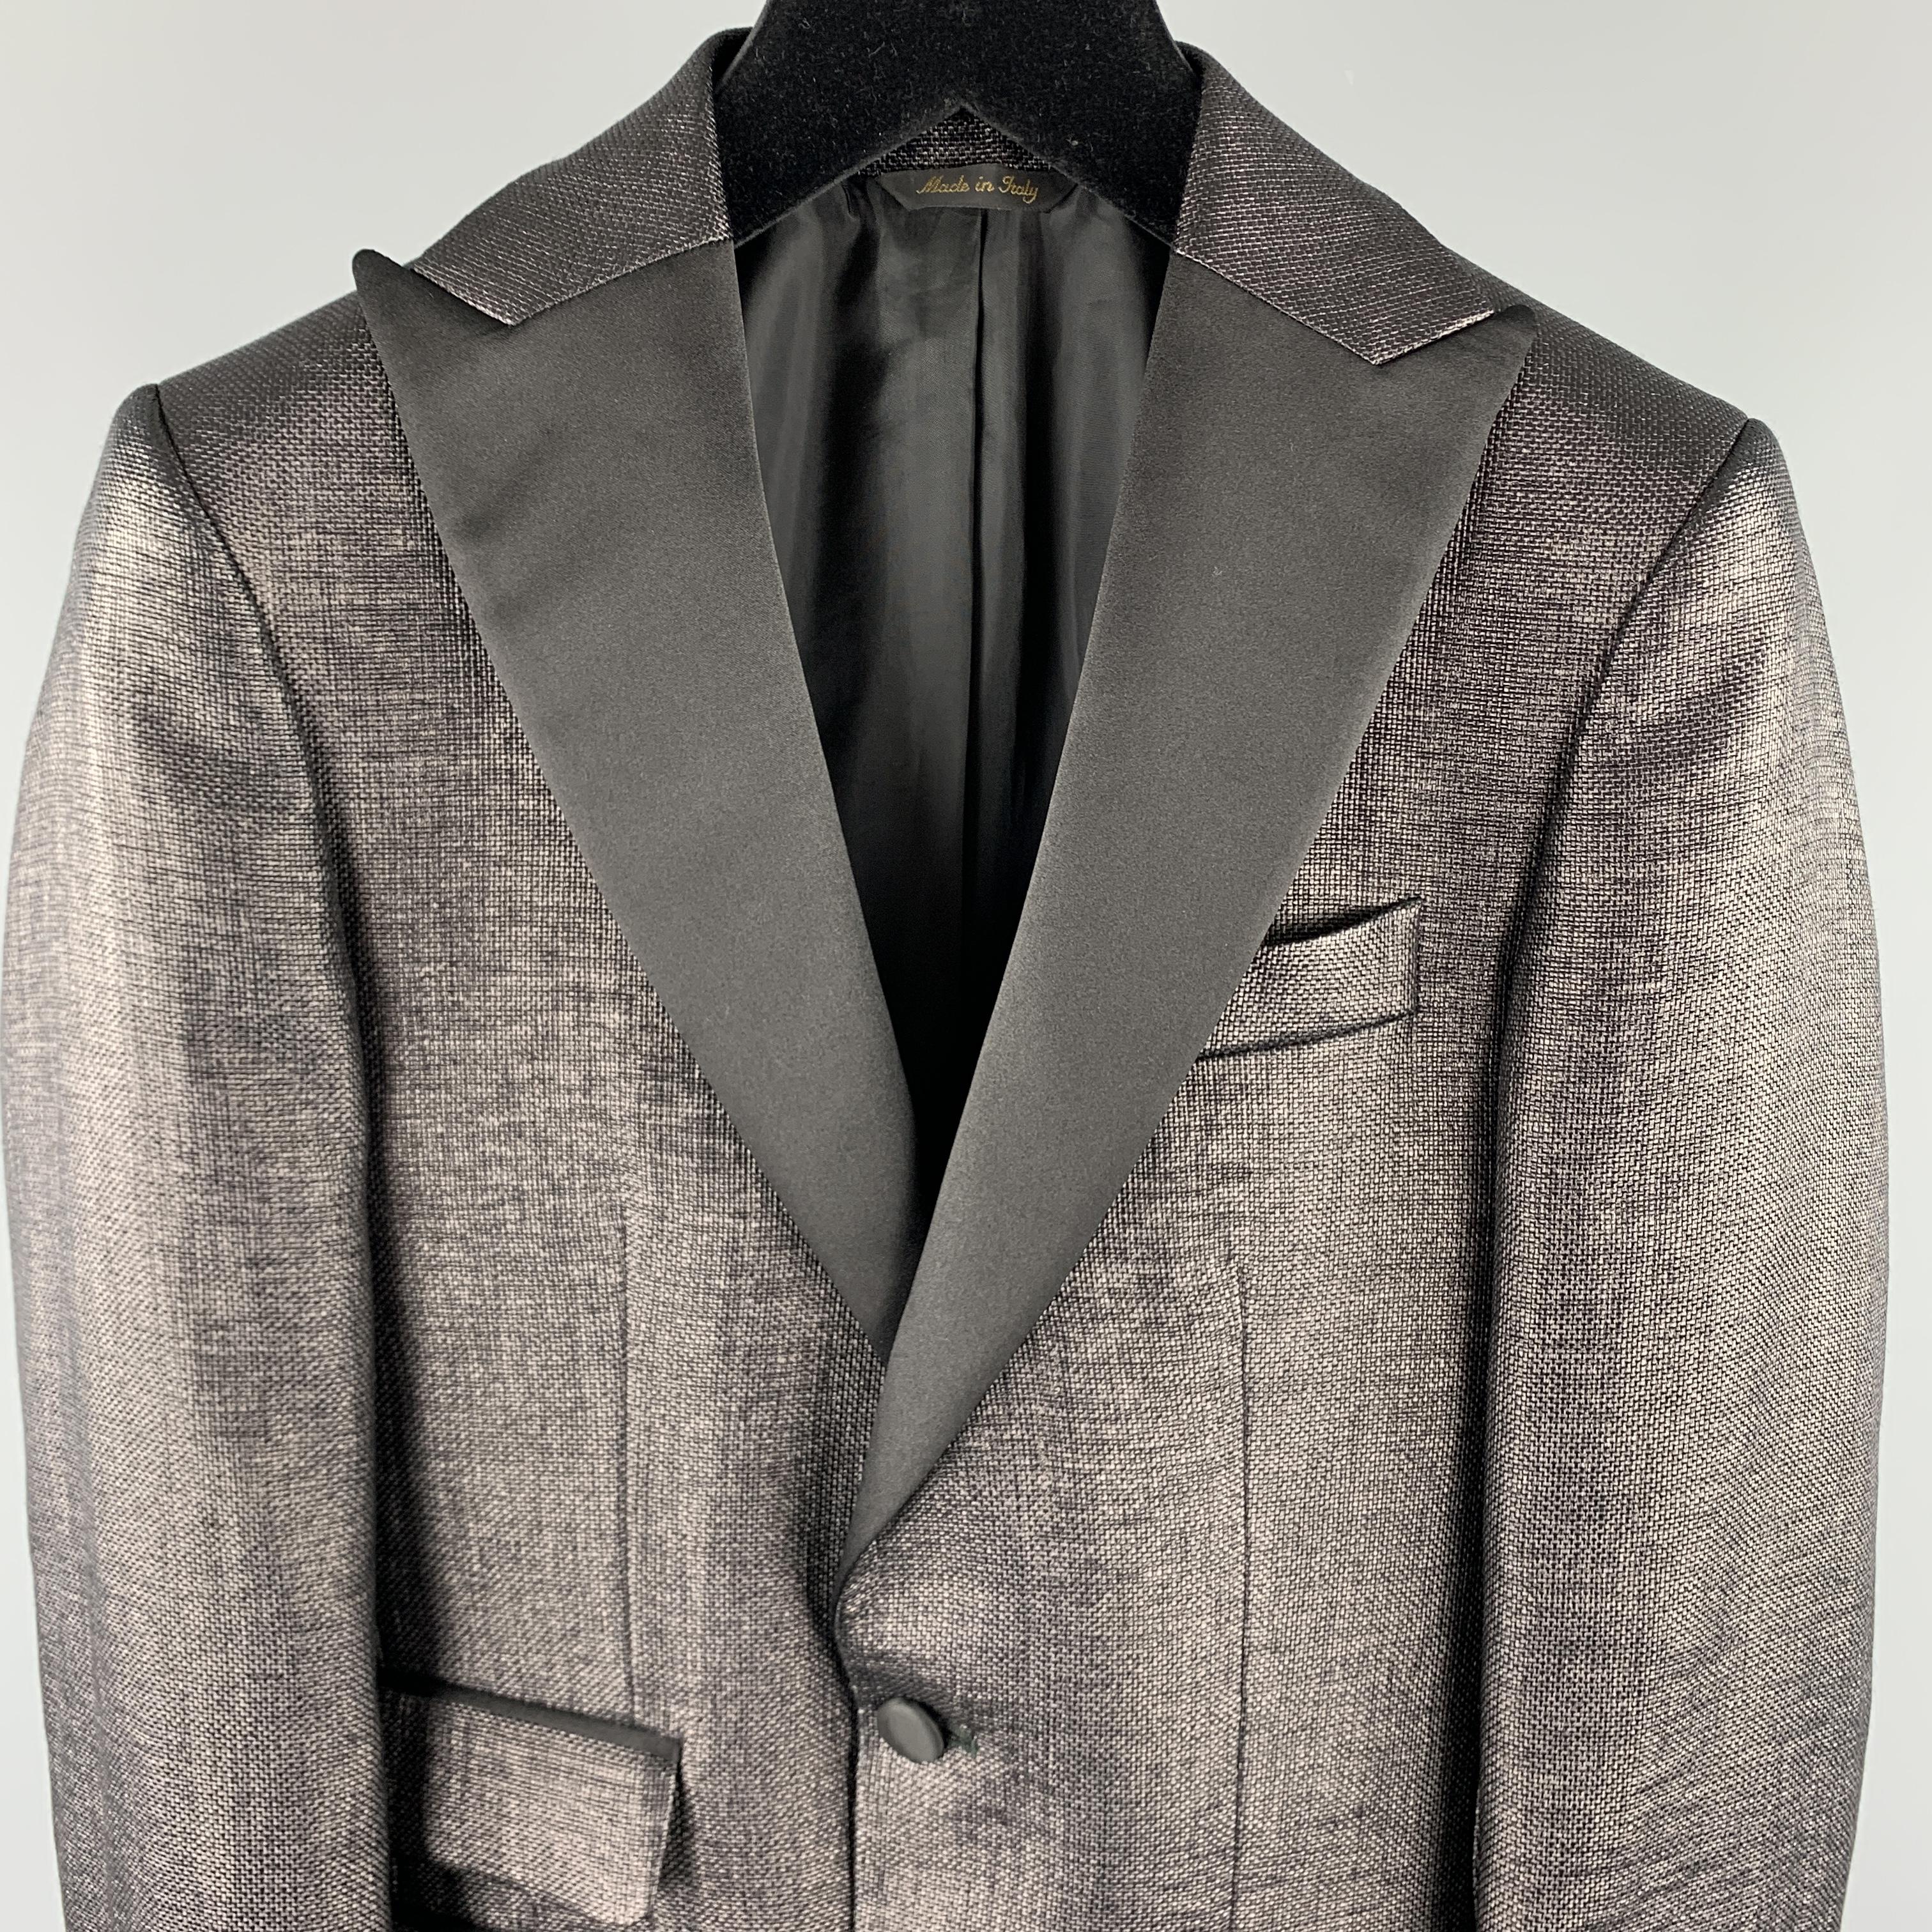 J. Lindeberg sport coat comes in a black woven cotton blend material, featuring a peak lapel, a single button at closure, slit and flap pockets, single breasted, buttoned cuffs, and a double vent at back. Made in Italy.

Excellent Pre-Owned